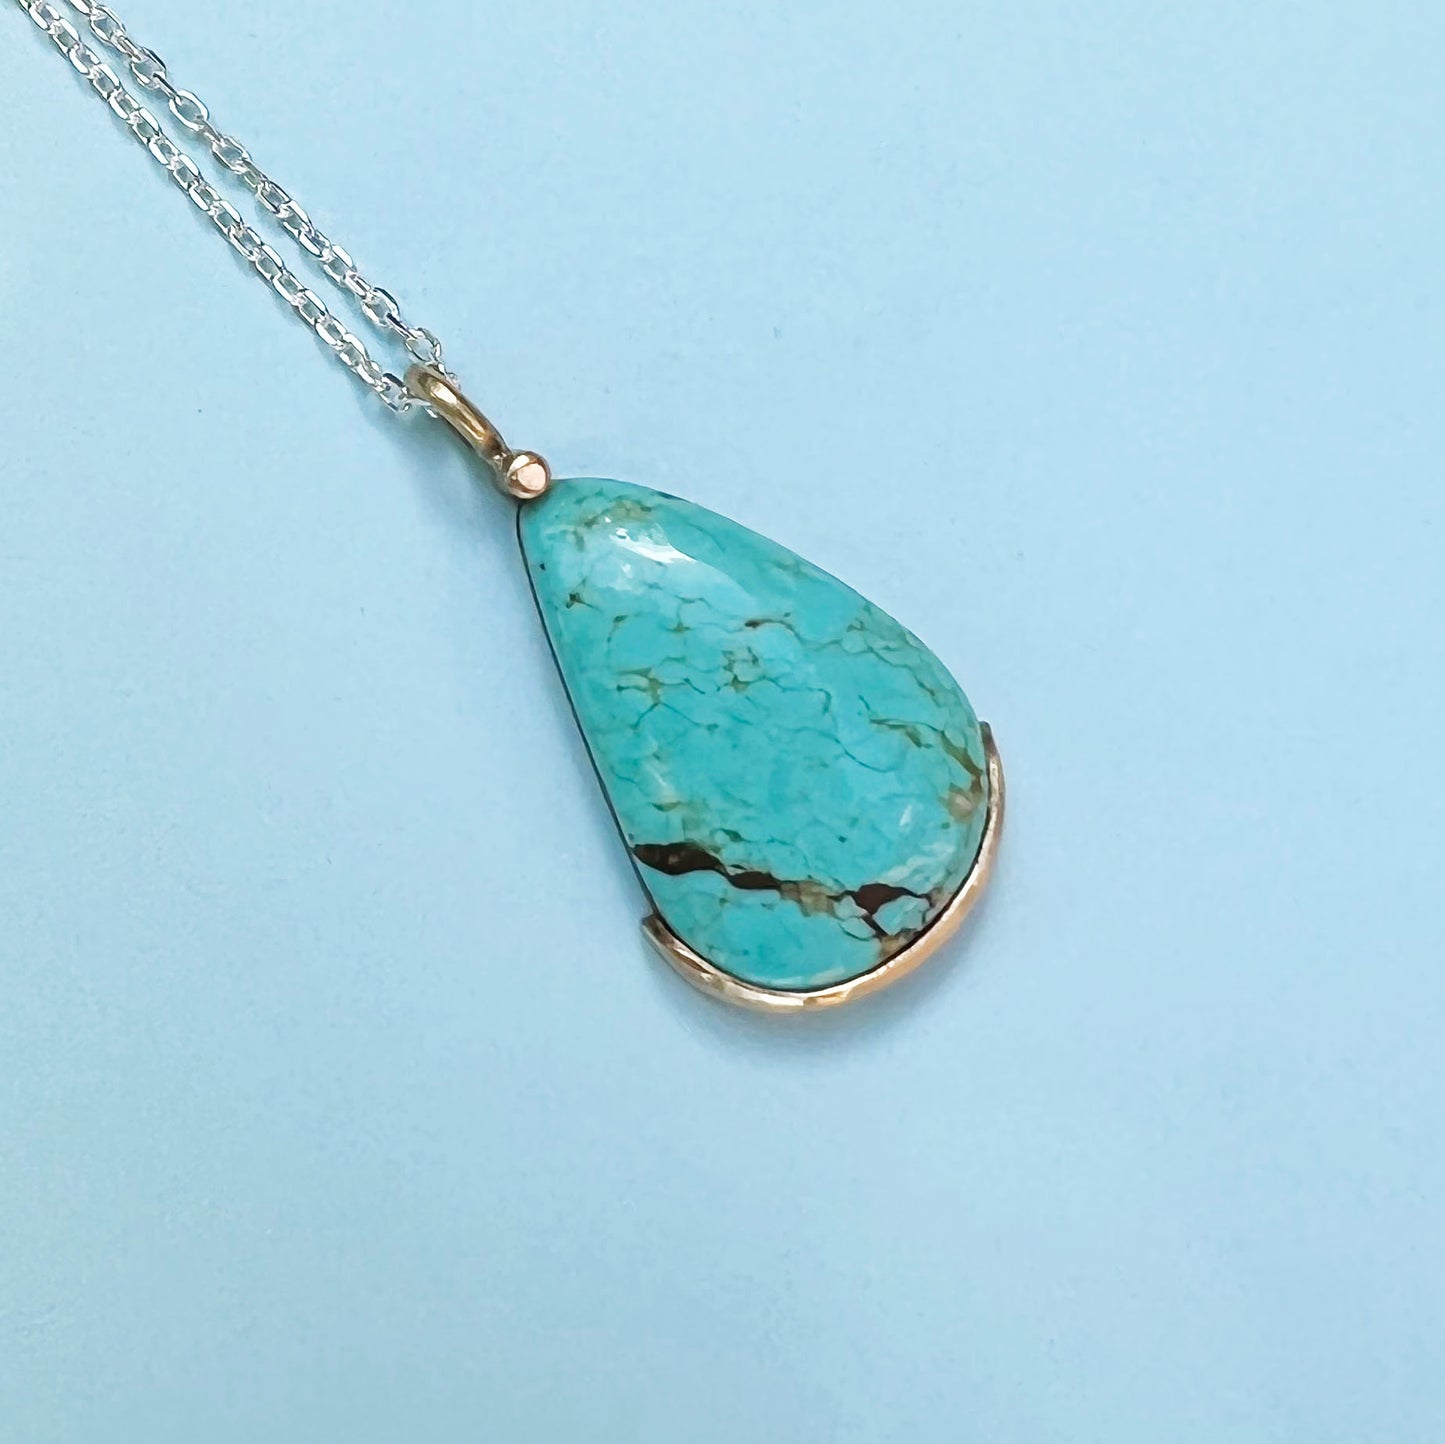 18ct gold & Turquoise necklace, Turquoise pendant, turquoise necklace, gold necklace, sterling silver chain, handmade jewellery, 18ct gold, gemstone necklace 